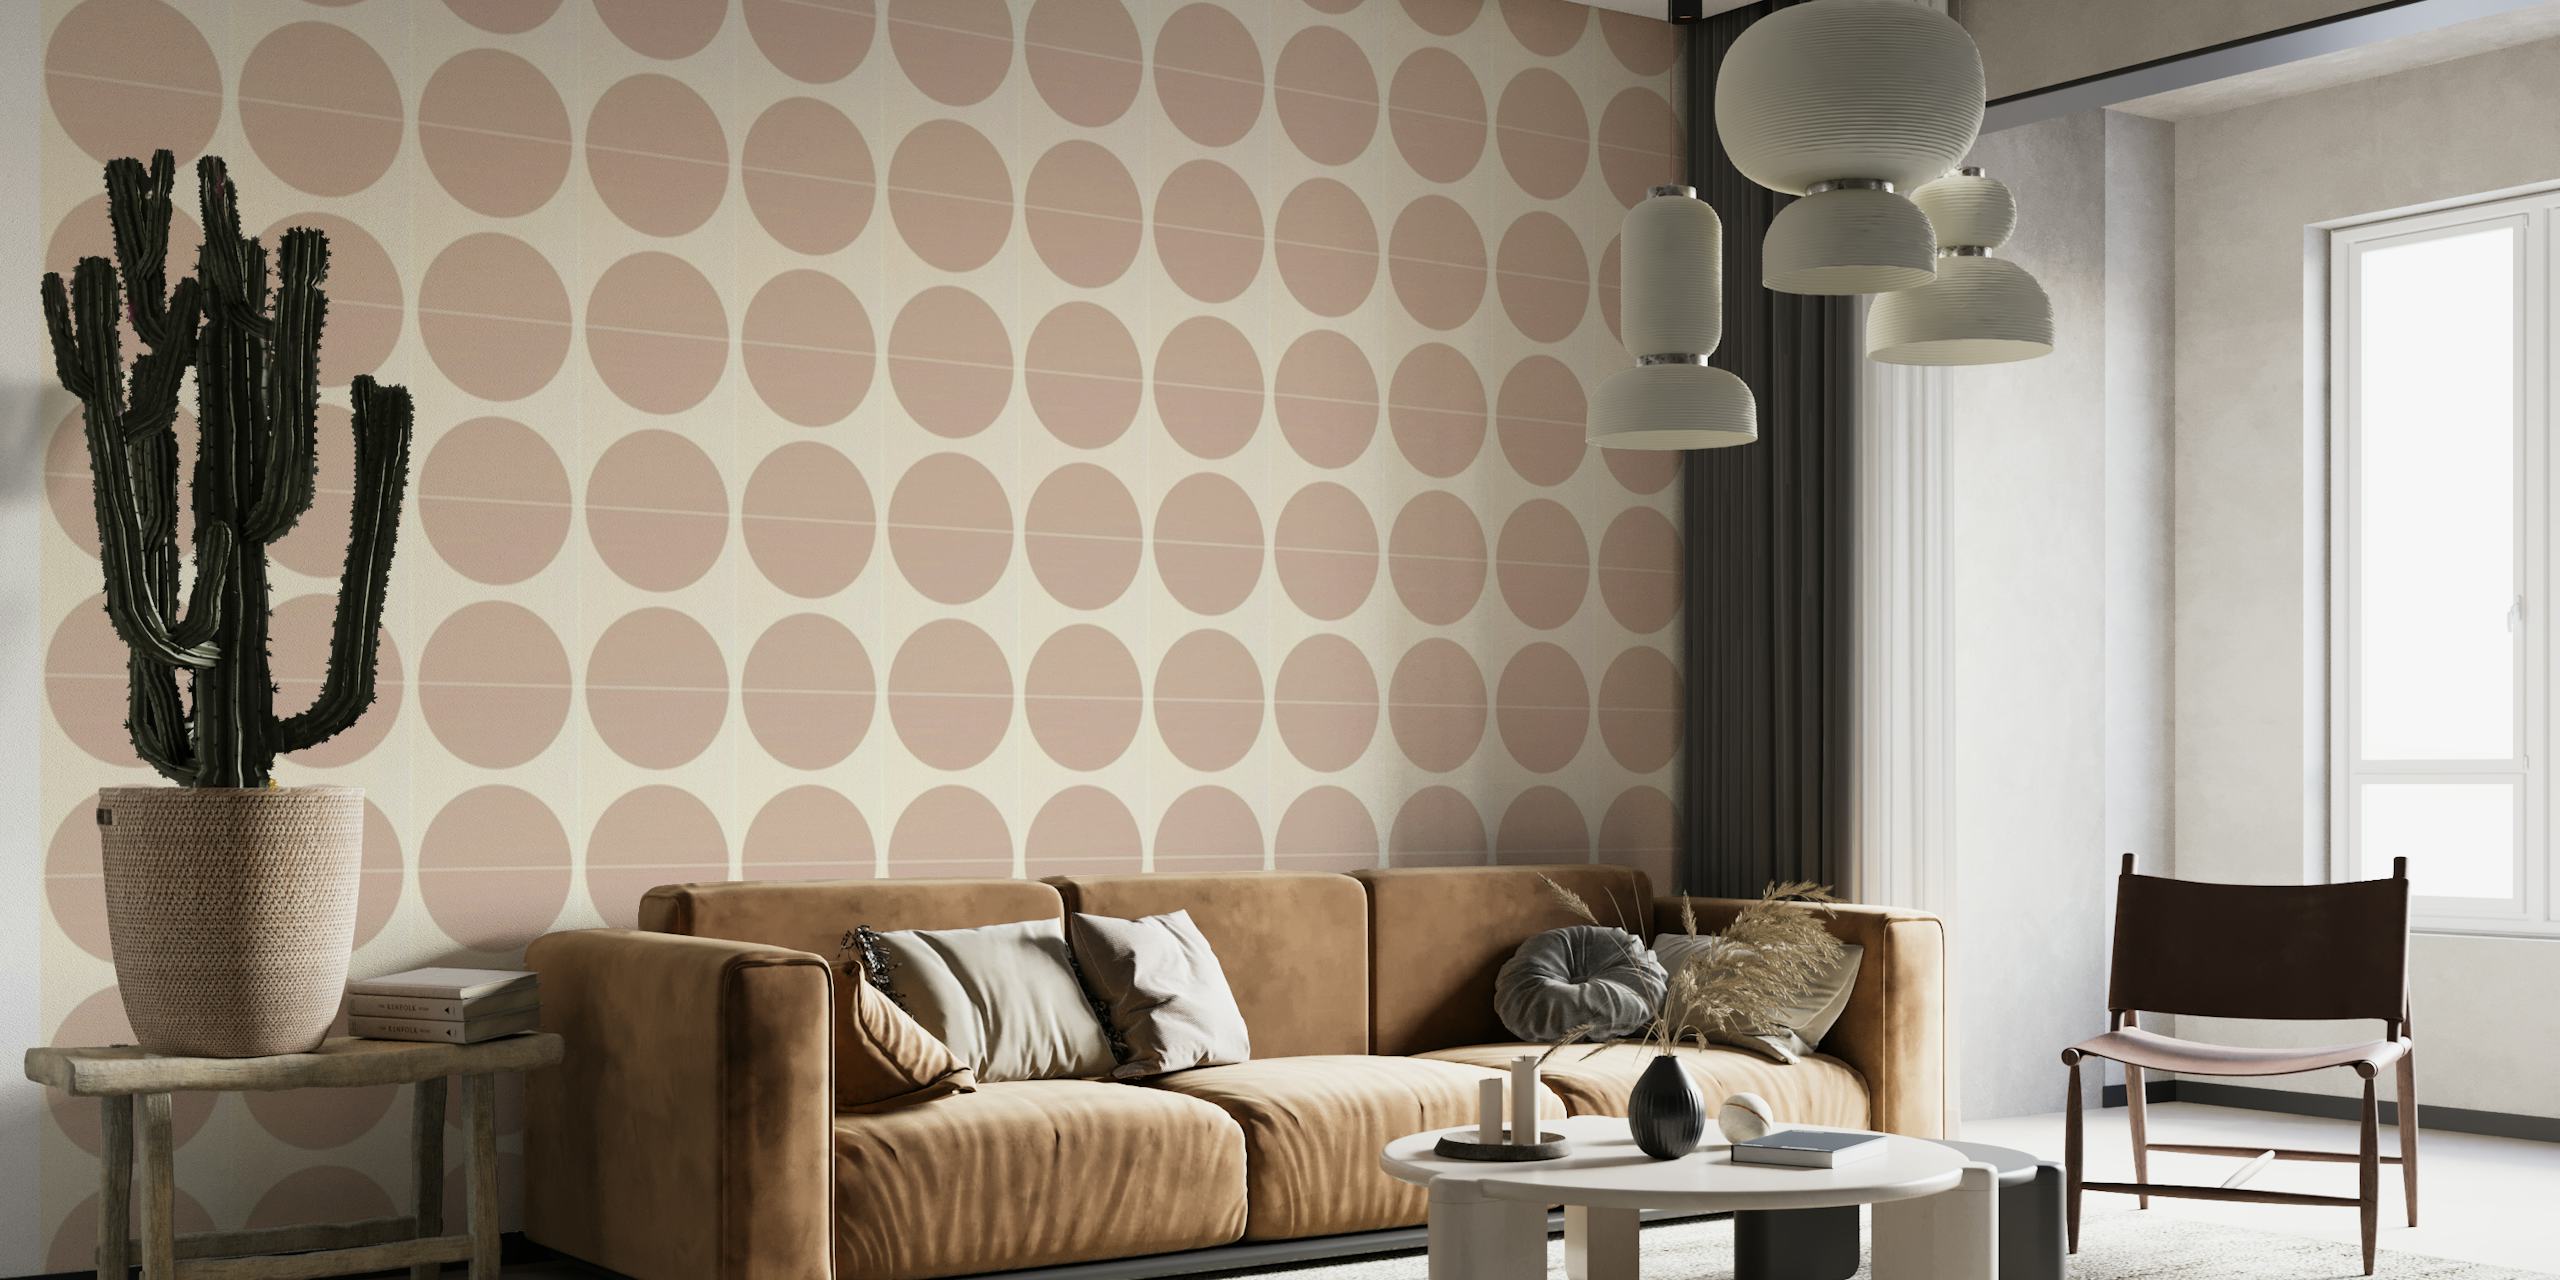 Painted Cotto Tiles Powder behang